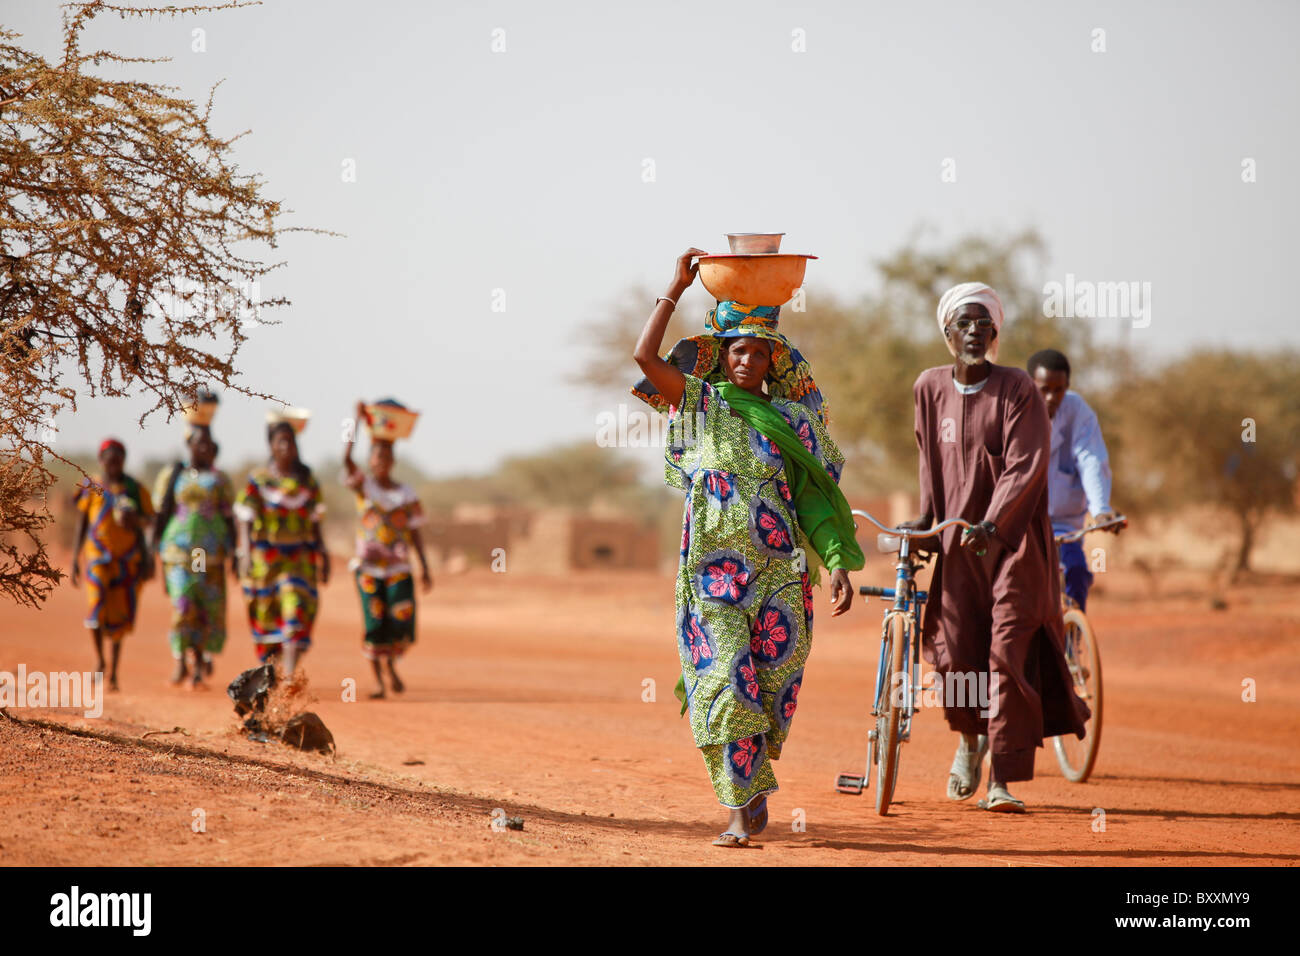 Women arrive in the town of Djibo, Burkina Faso, on foot, carrying their wares on their heads in traditional African fashion. Stock Photo